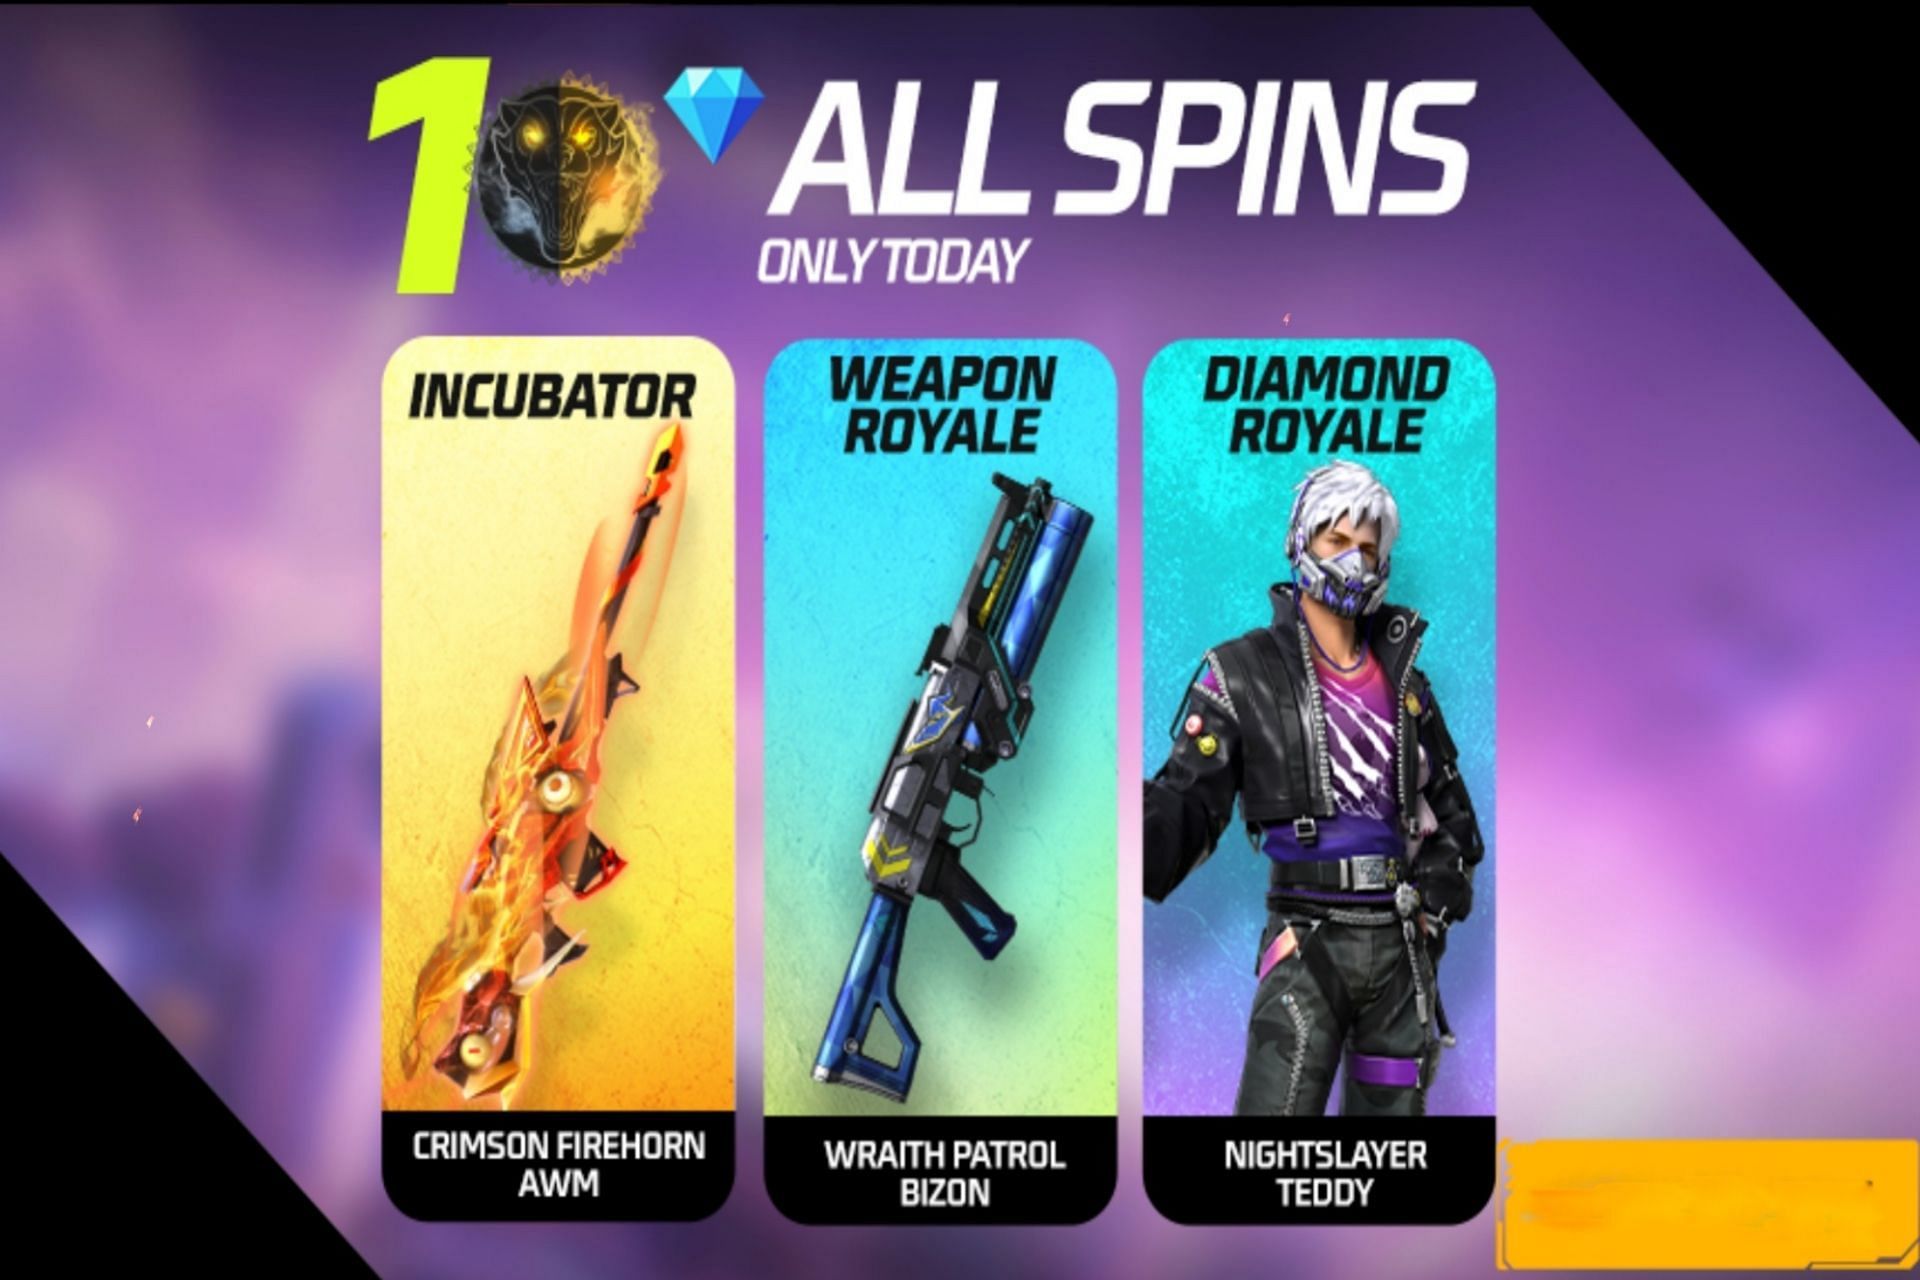 how-to-get-a-discount-in-free-fire-max-diamond-royale-weapon-royale-and-incubator-26-october